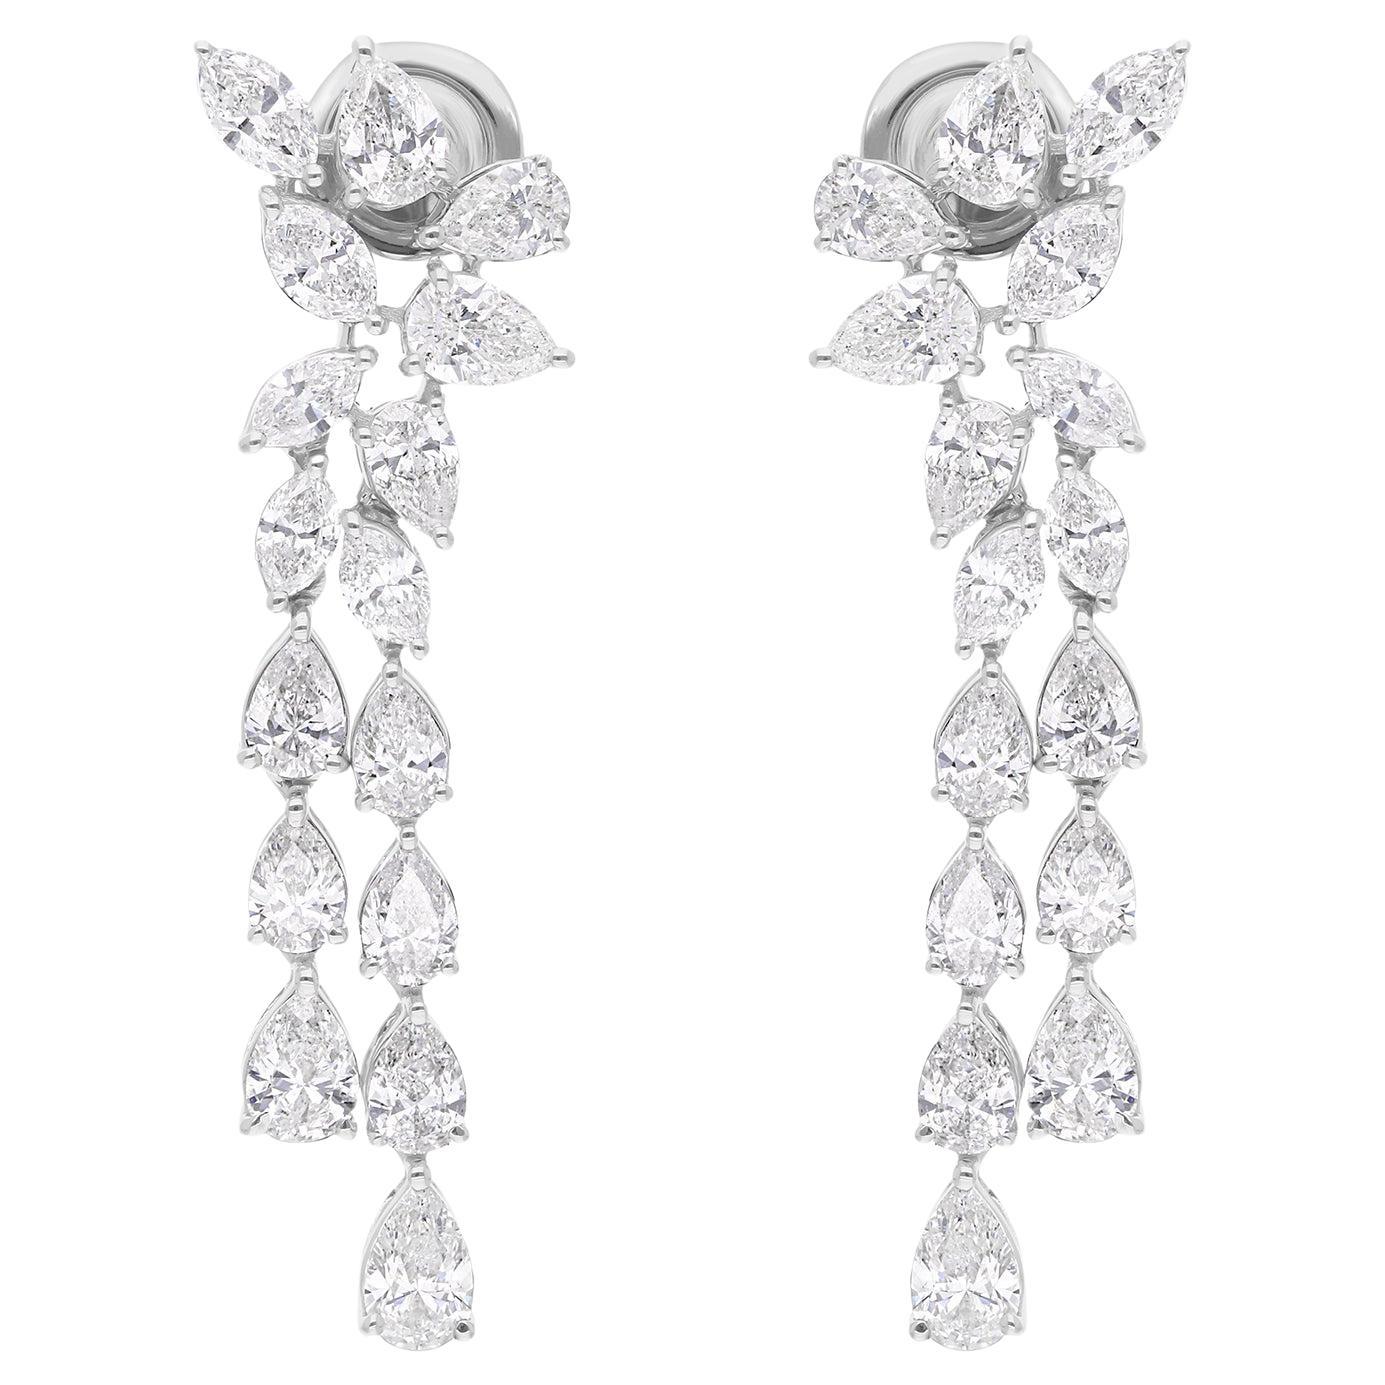 Natural 5.18 Carat Pear & Marquise Diamond Earrings 14 Karat White Gold Jewelry For Sale